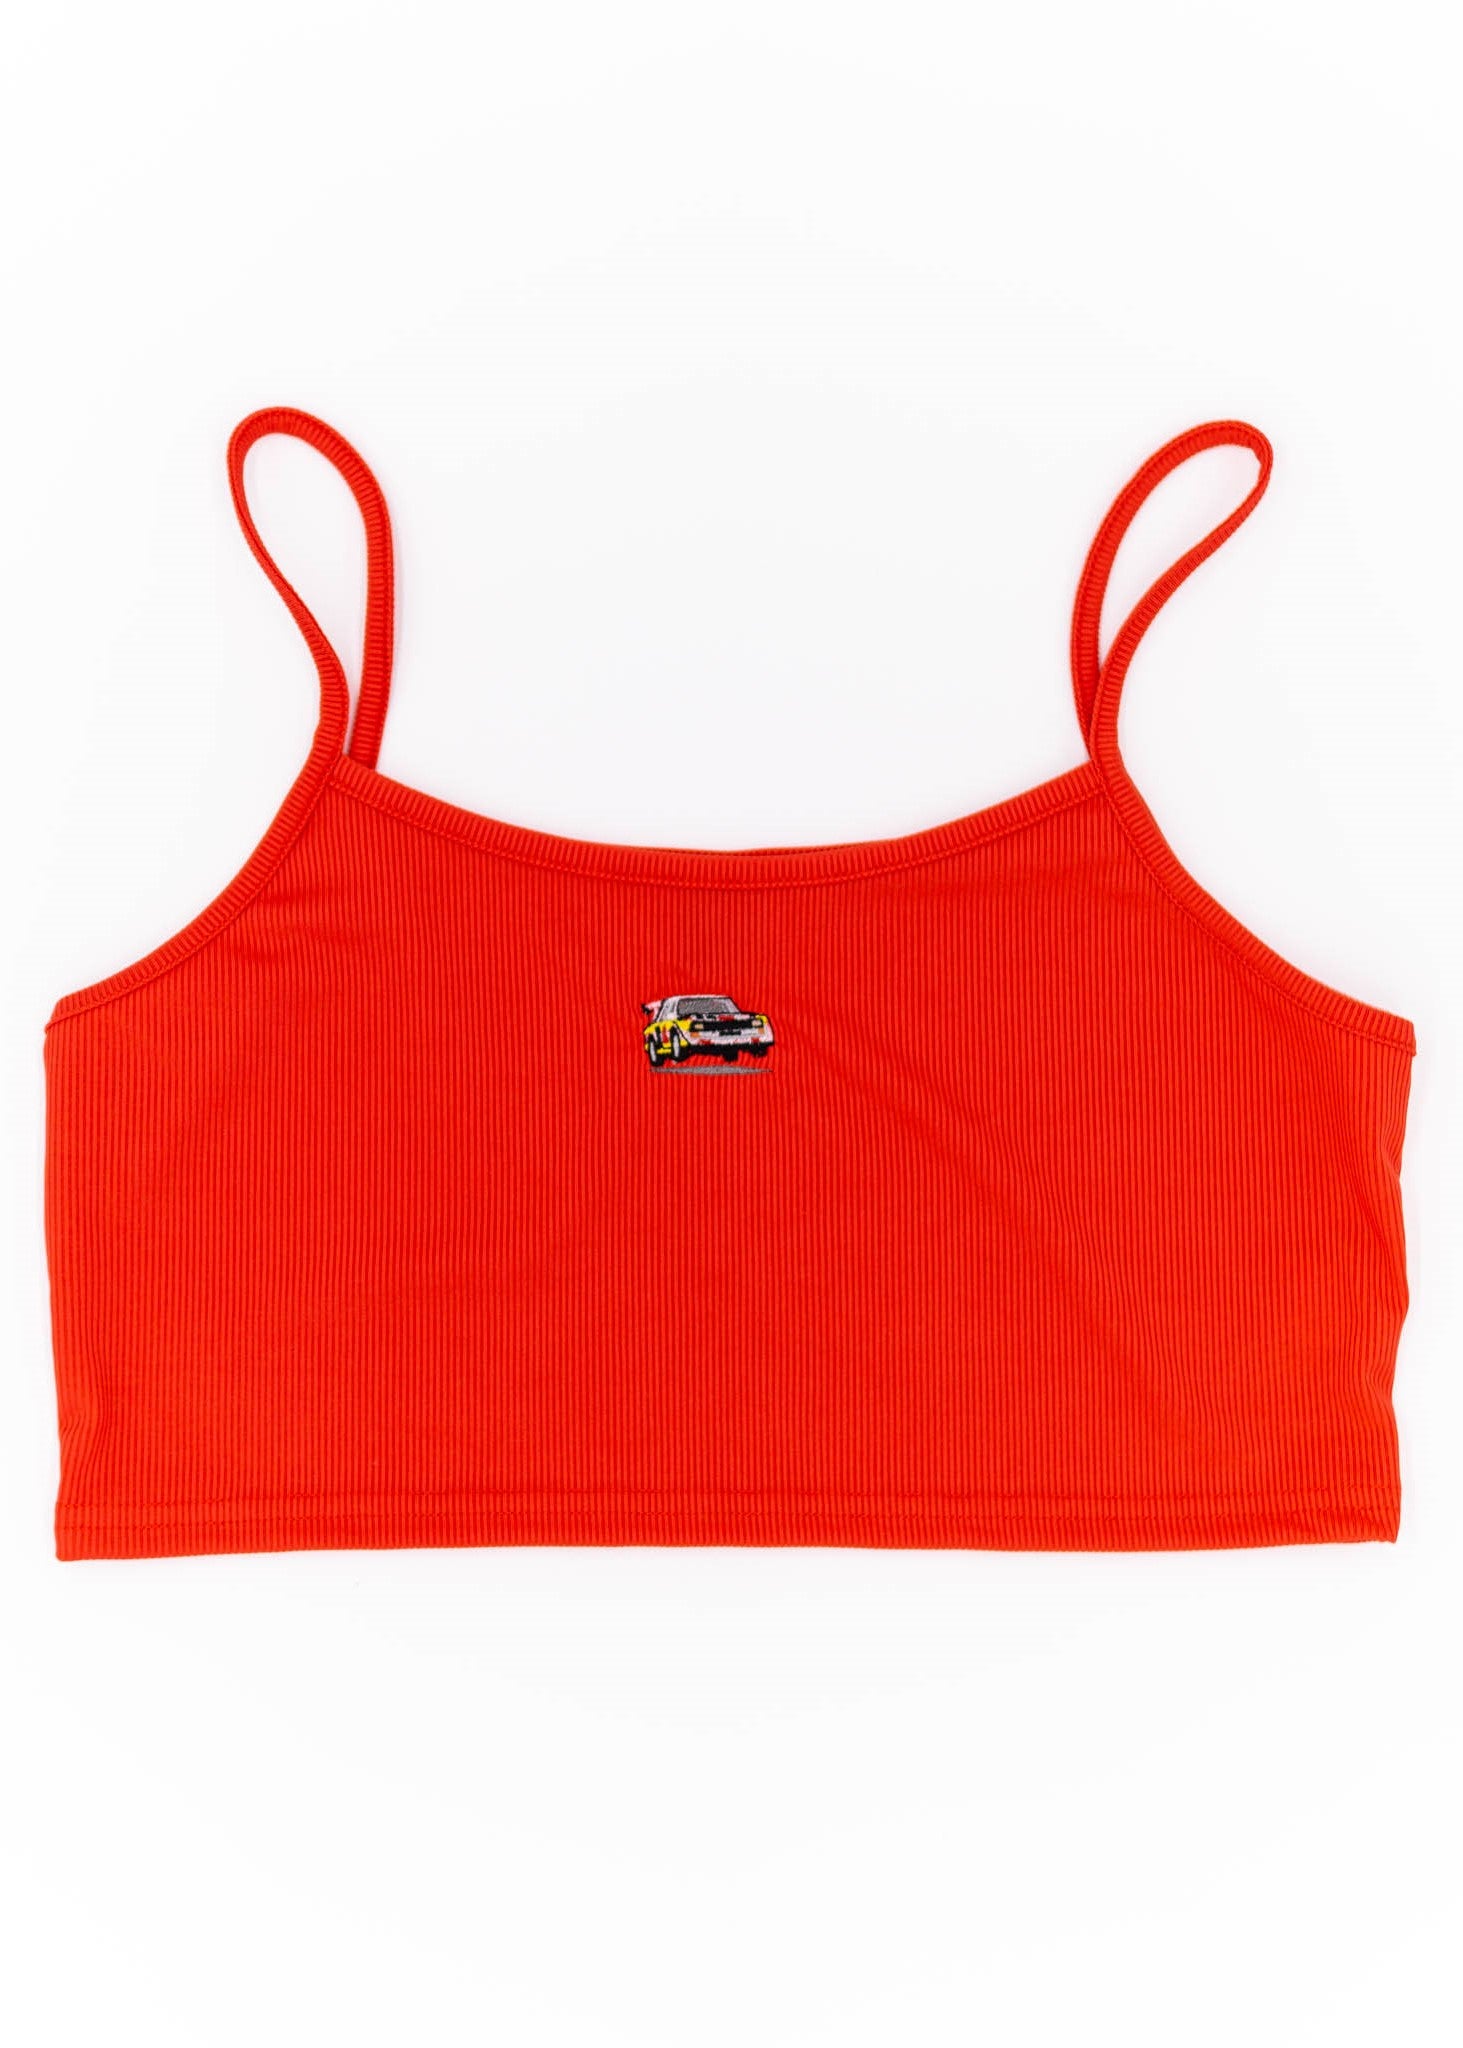 A red Audi crop top for plus size women. Photo is a front view of the top with an embroidered Sport Quattro S1 E2. Fabric composition is 100% polyester. The material is stretchy, ribbed, and non-transparent. The style of this shirt is sleeveless, with a scoop neckline.